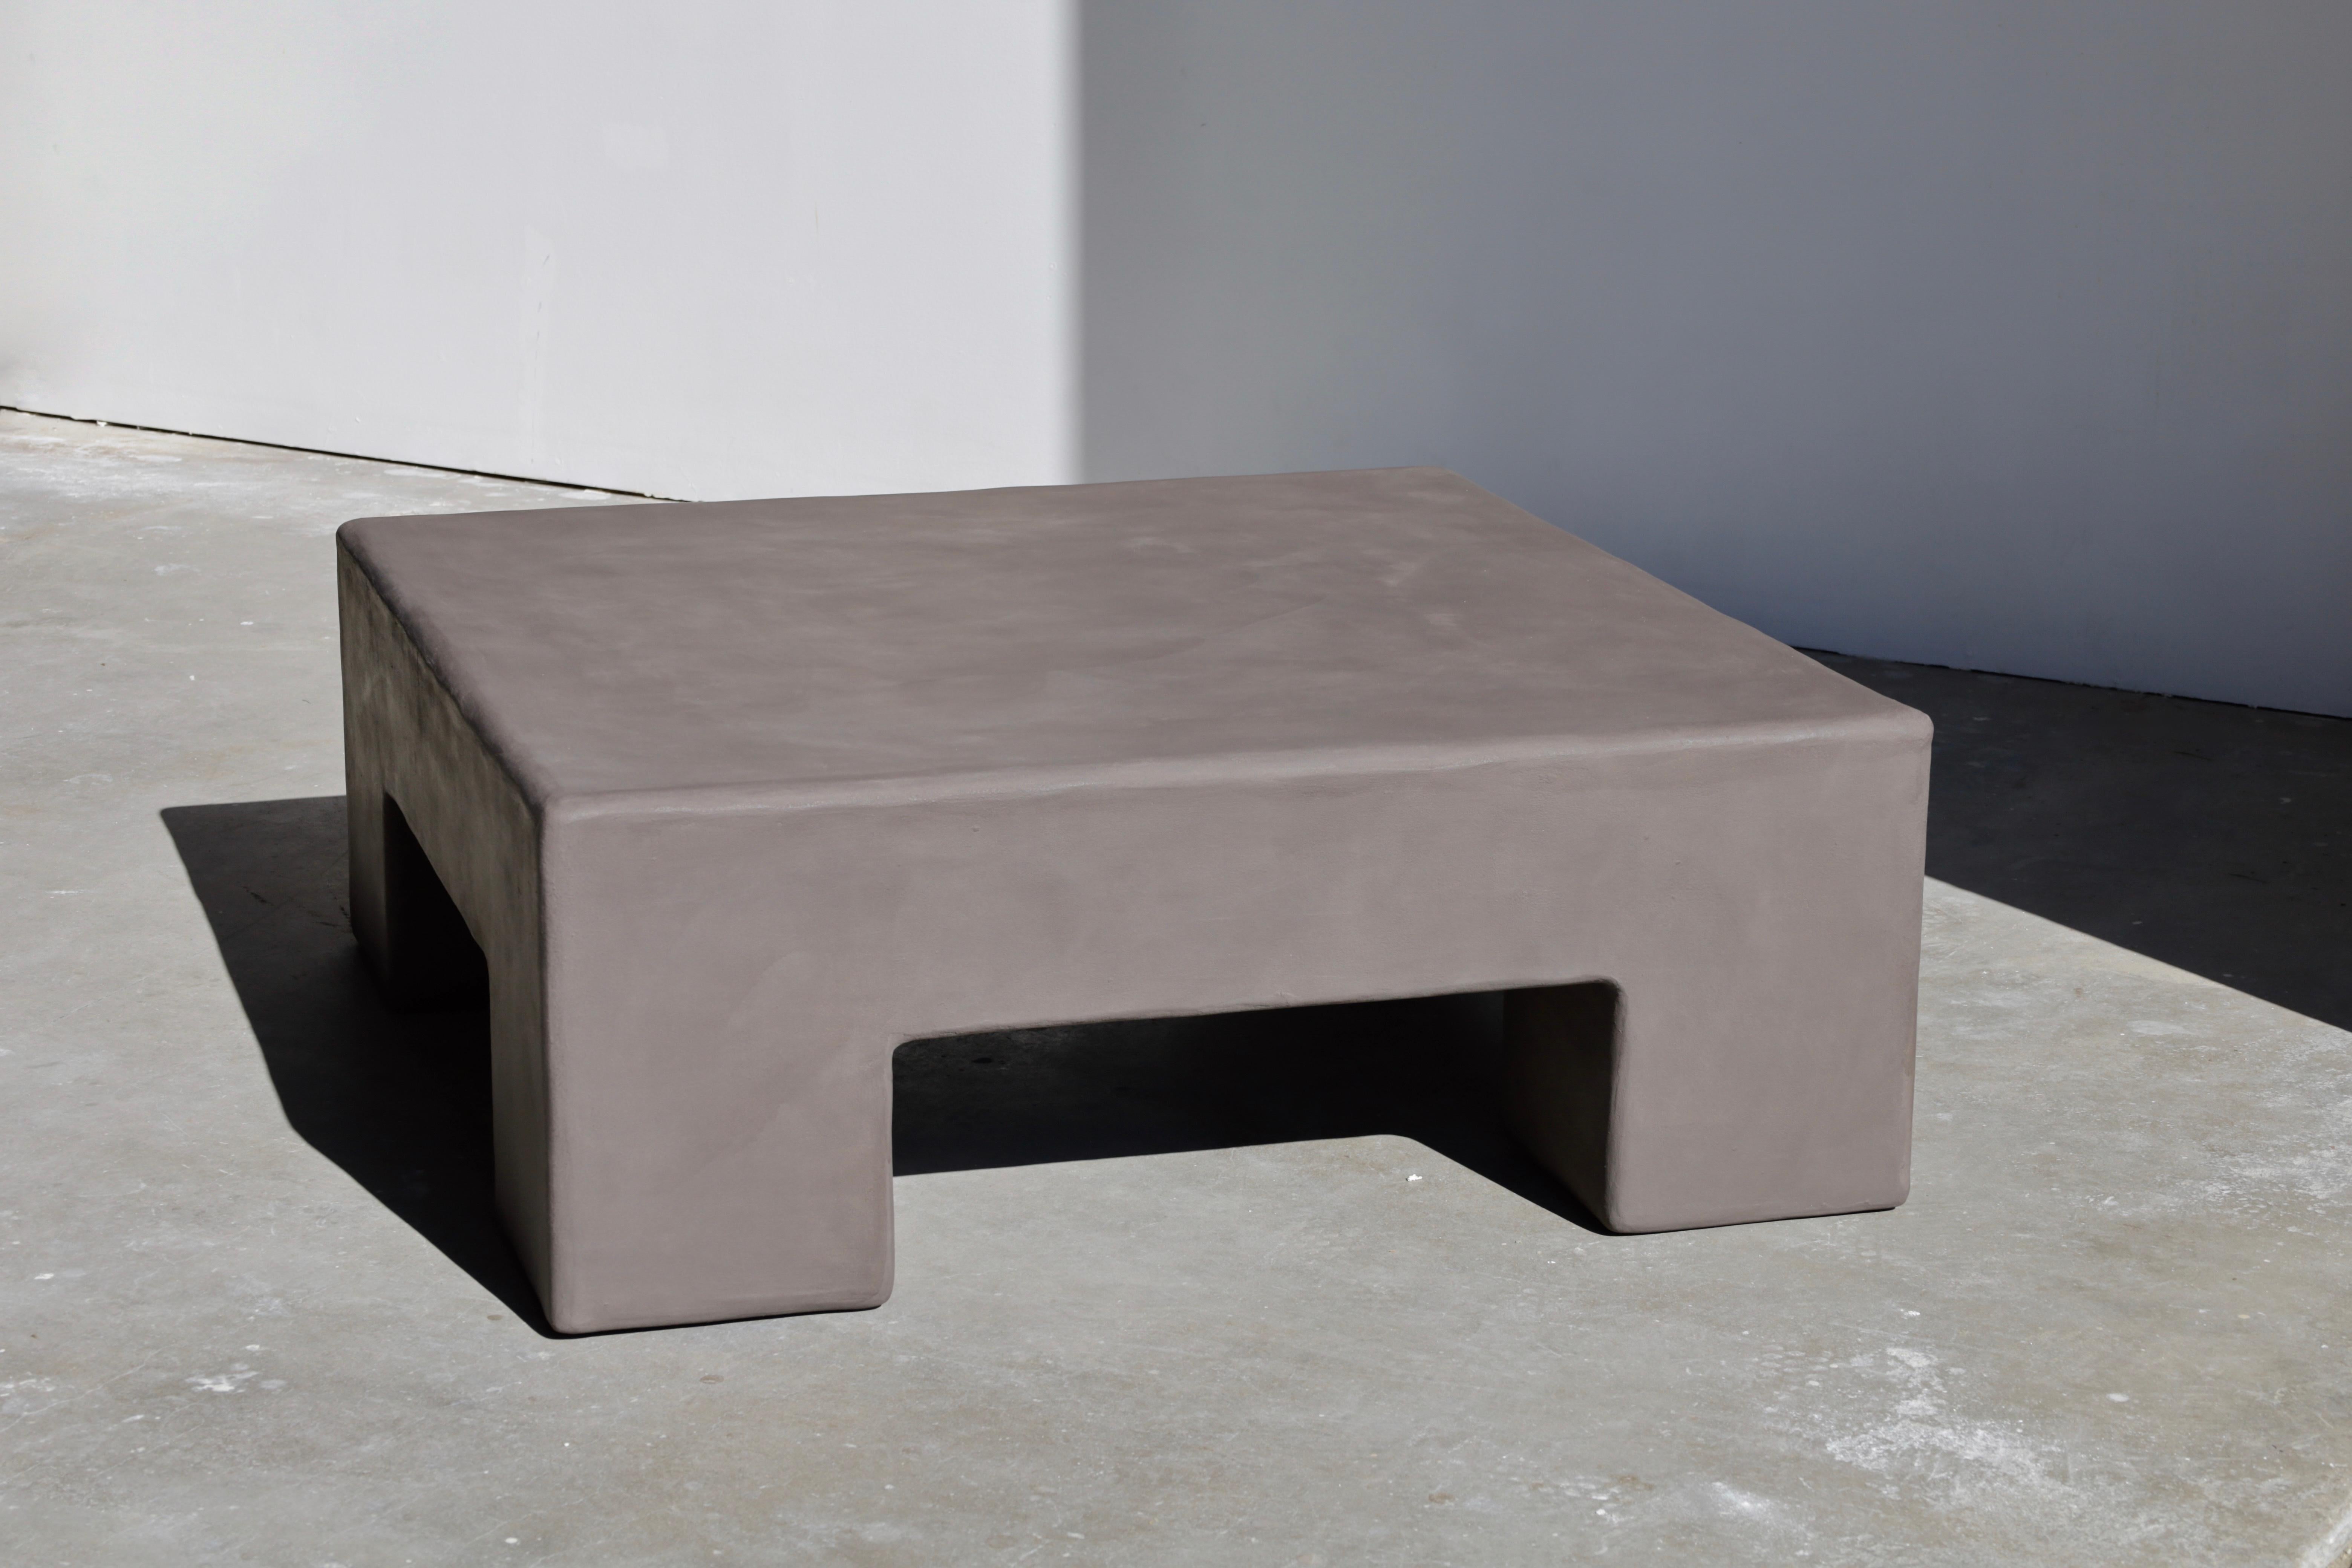 Contemporary scout minimalist plaster coffee table in atacama by öken house studios For Sale